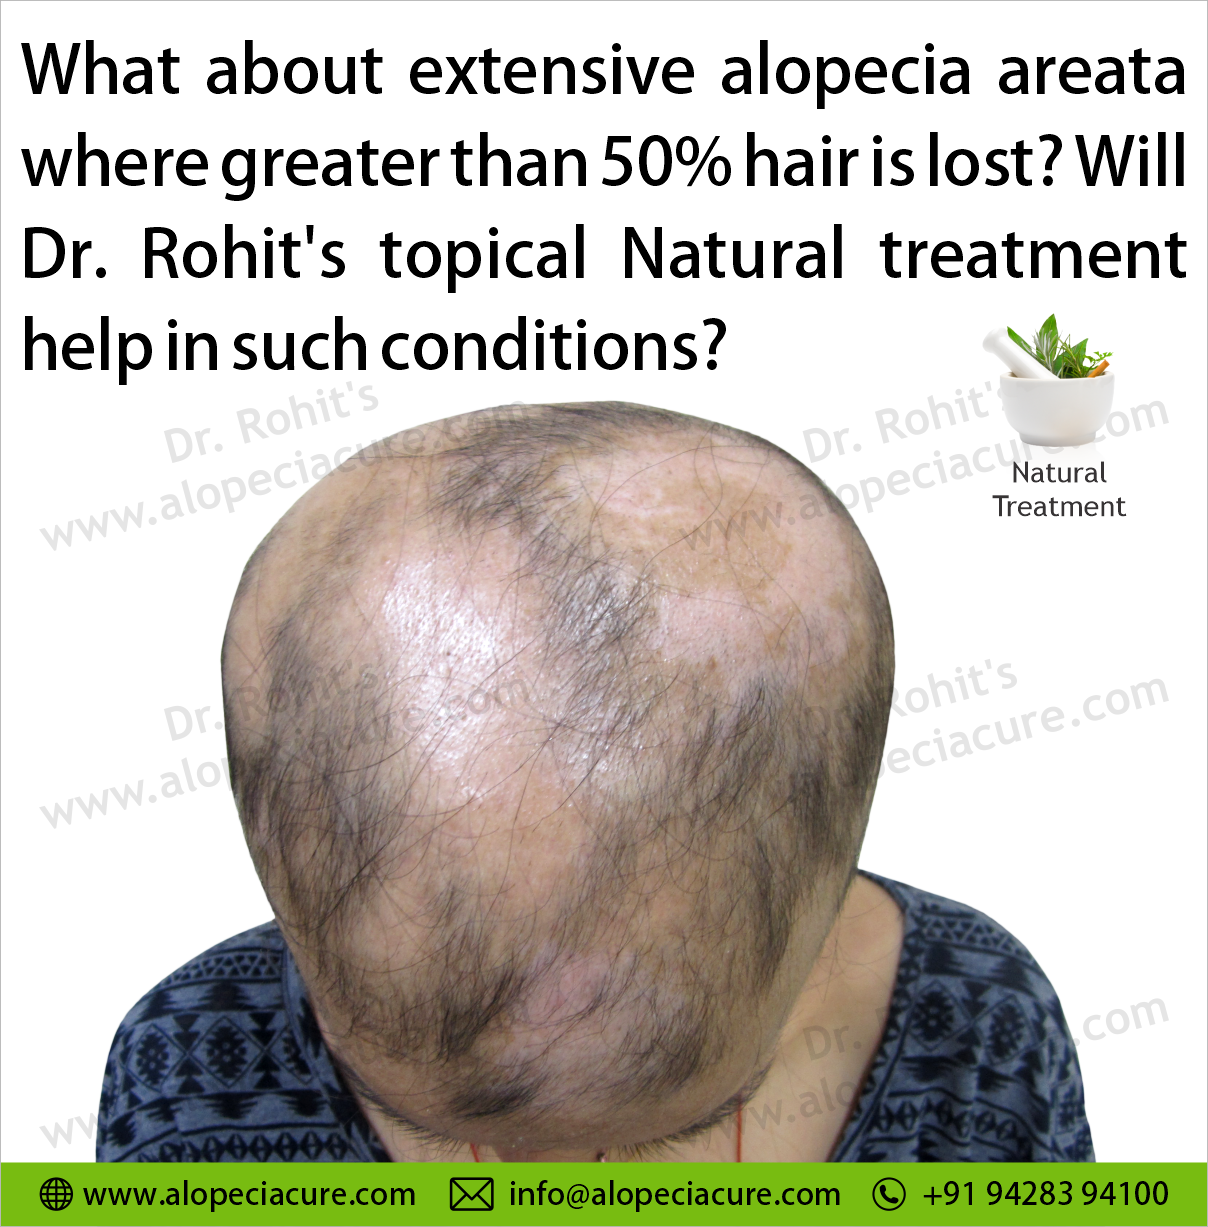 What about extensive alopecia areata where greater than 50% hair is lost? Will Dr. Rohit's topical Natural treatment help in such conditions?